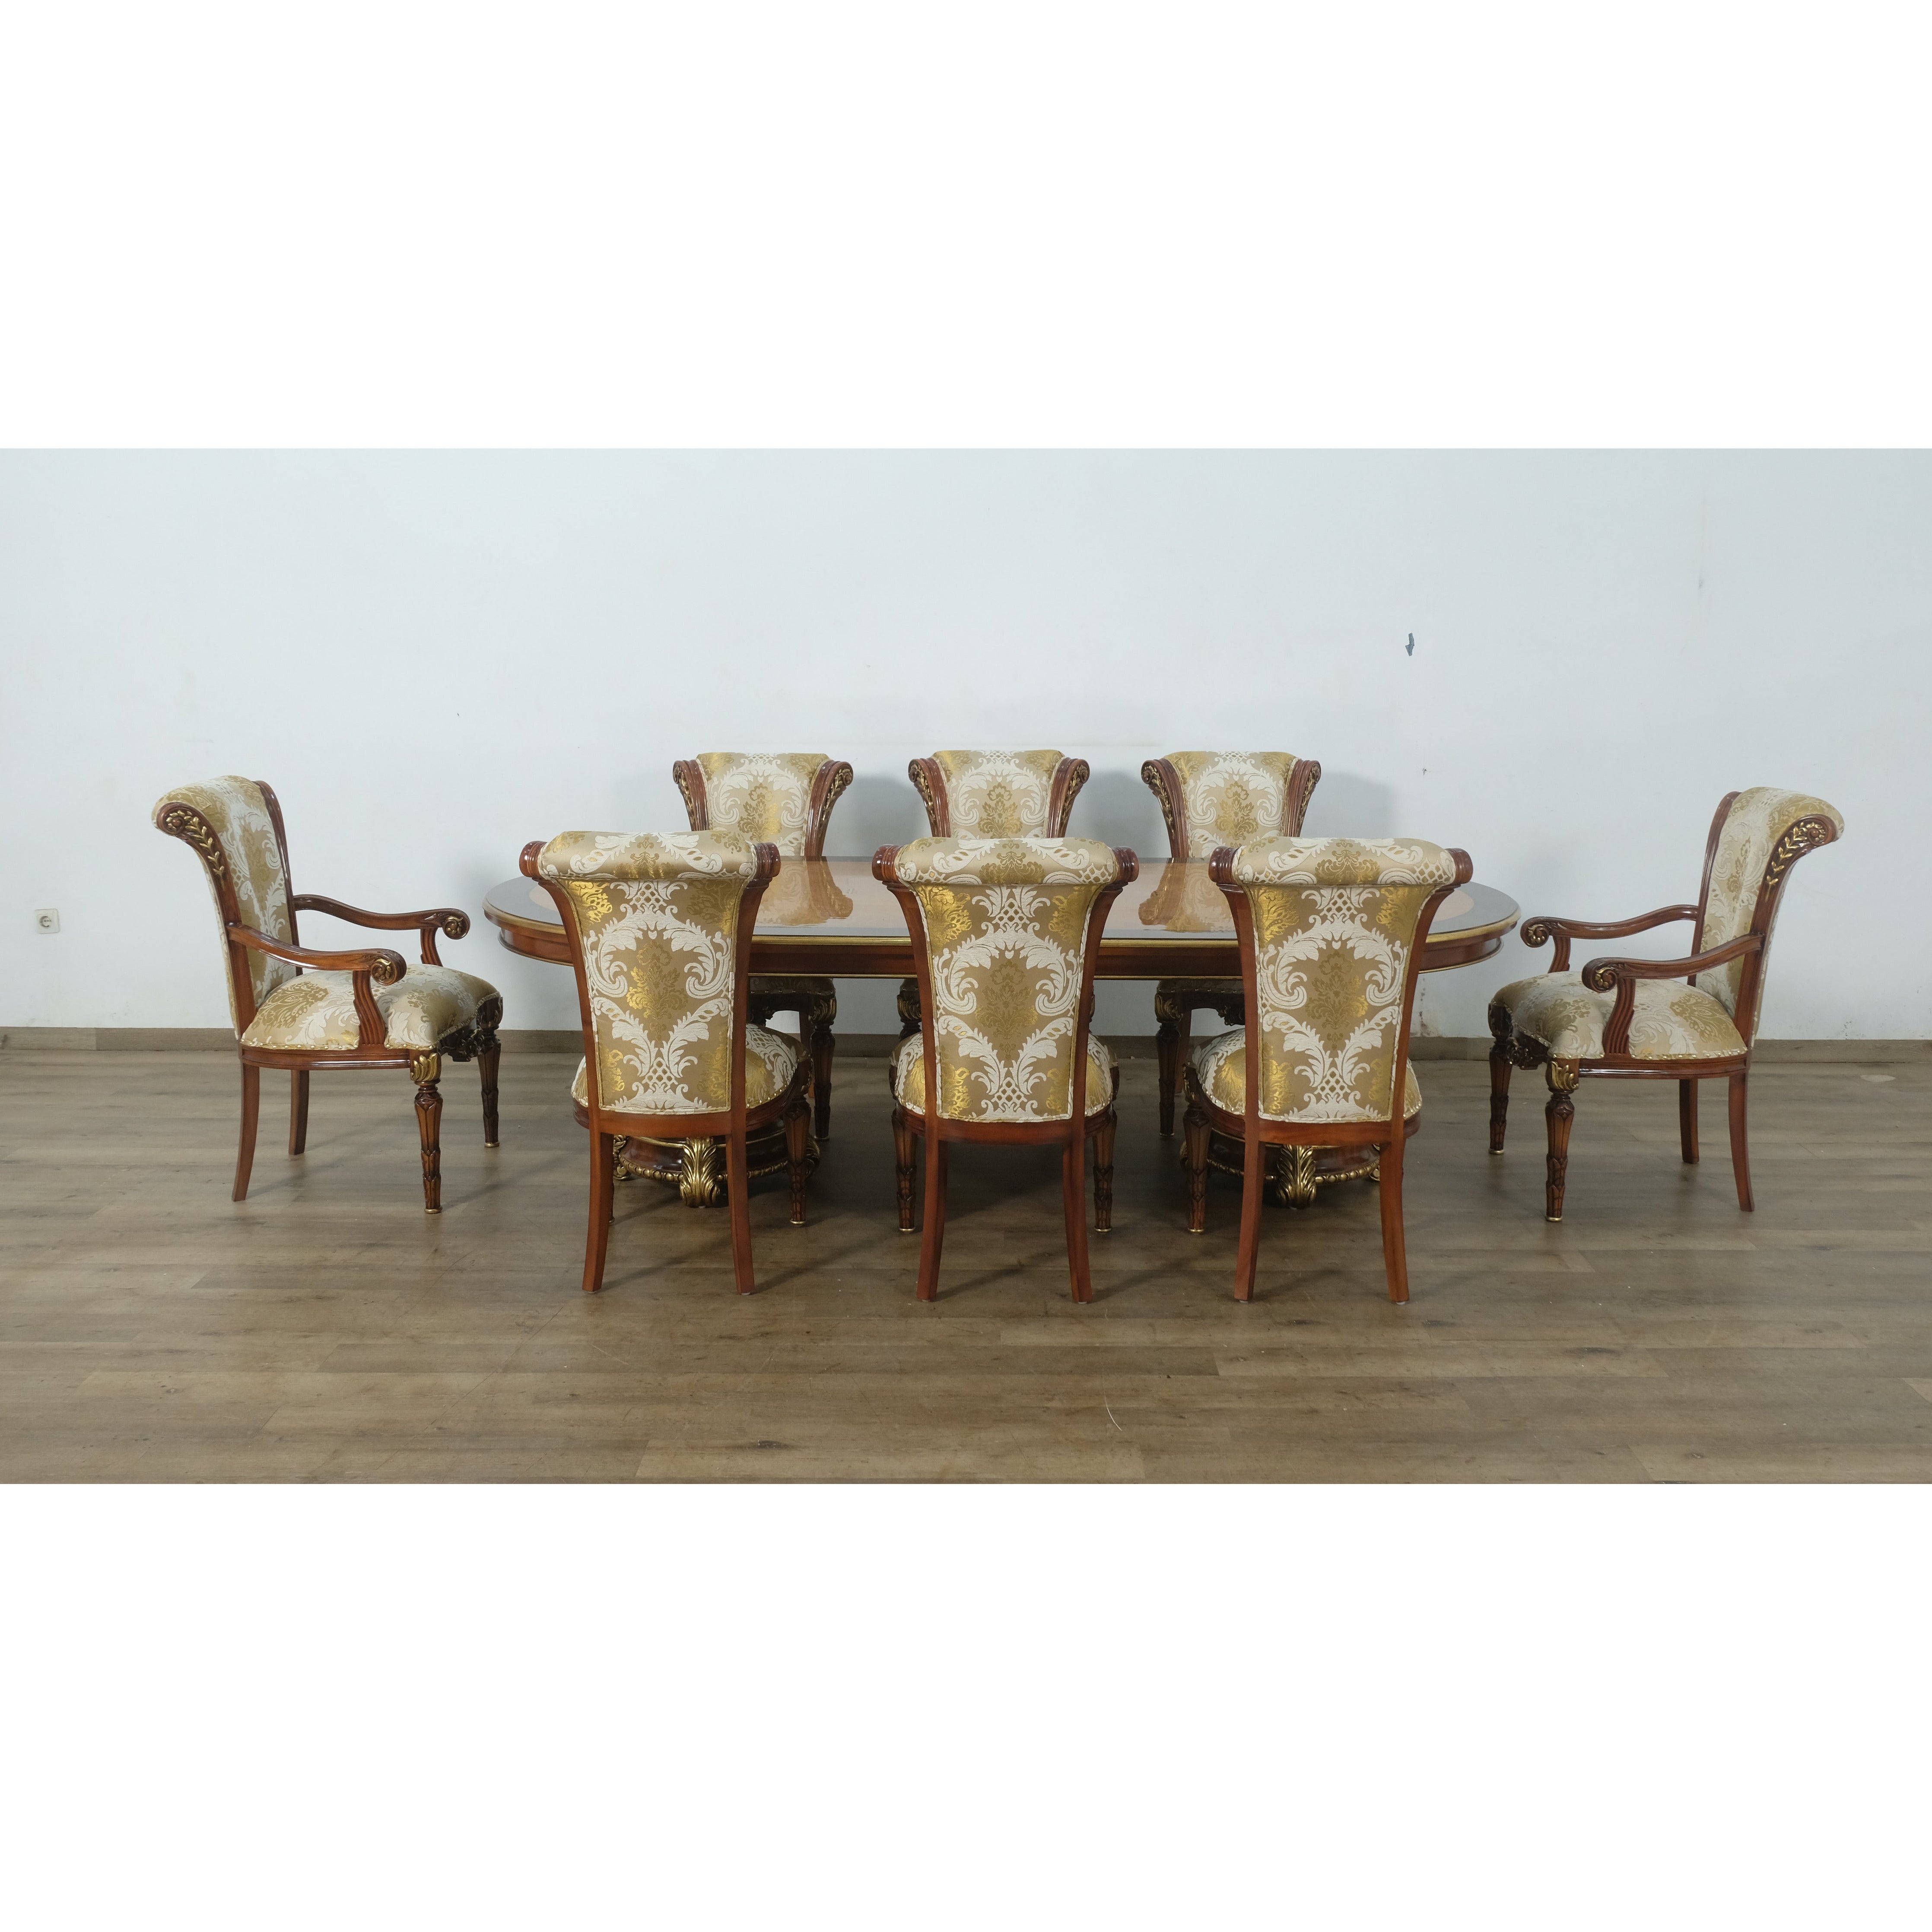 European Furniture - Veronica 9 Piece Dining Room Set With Damask Gold Fabric Chair - 47076DT-9SET - New Star Living